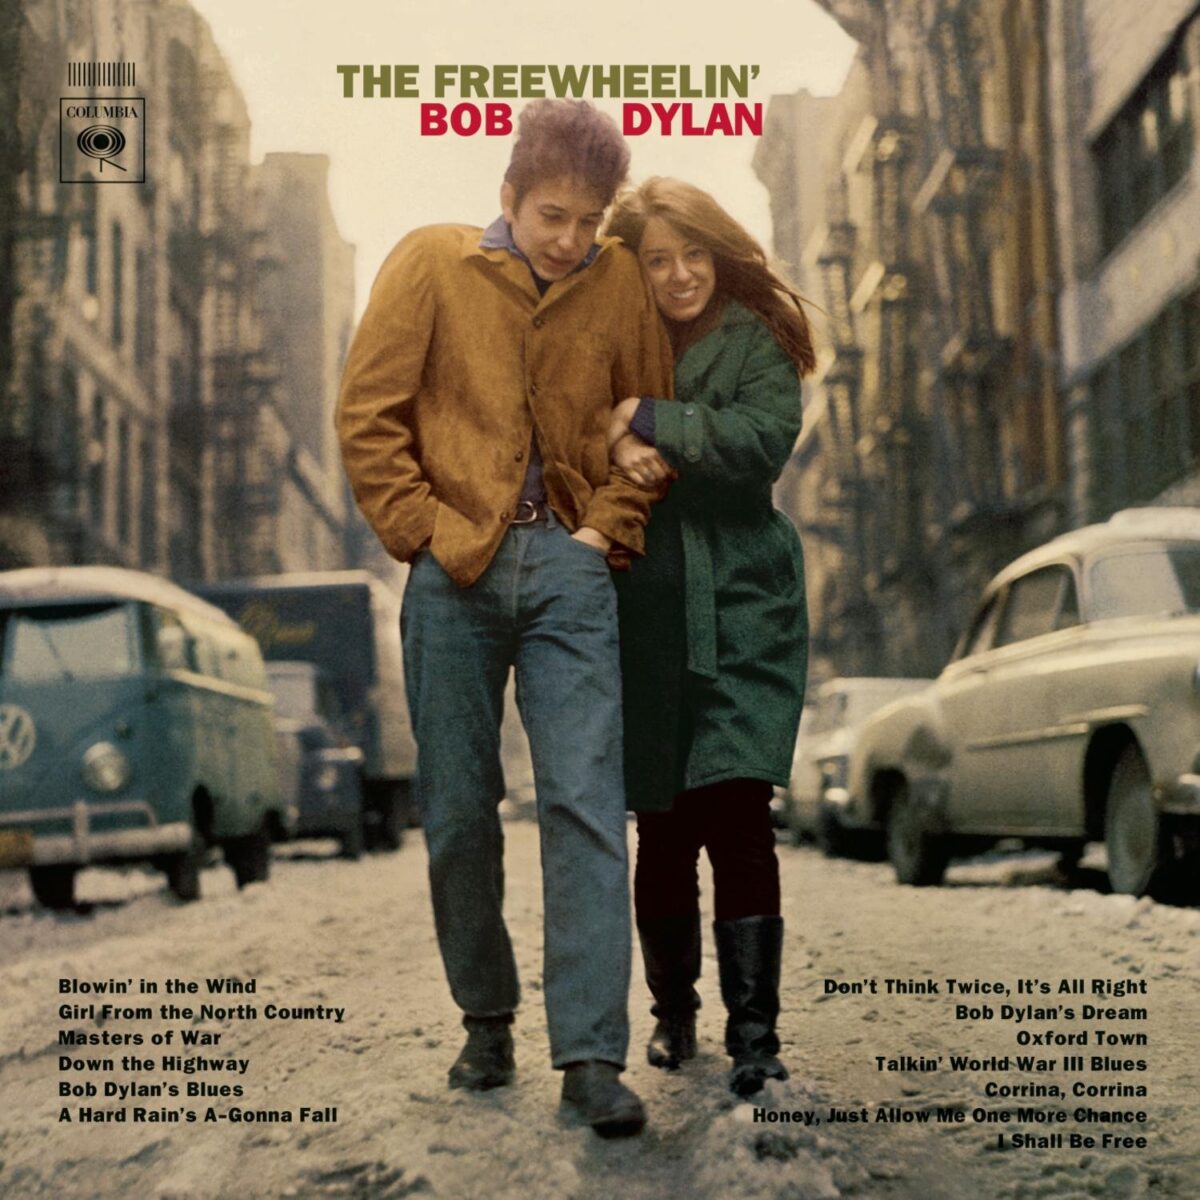 The cover of "The Free Wheelin' Bob Dylan." Pictures a man and a woman walking down the street in warm clothes, holding hands.